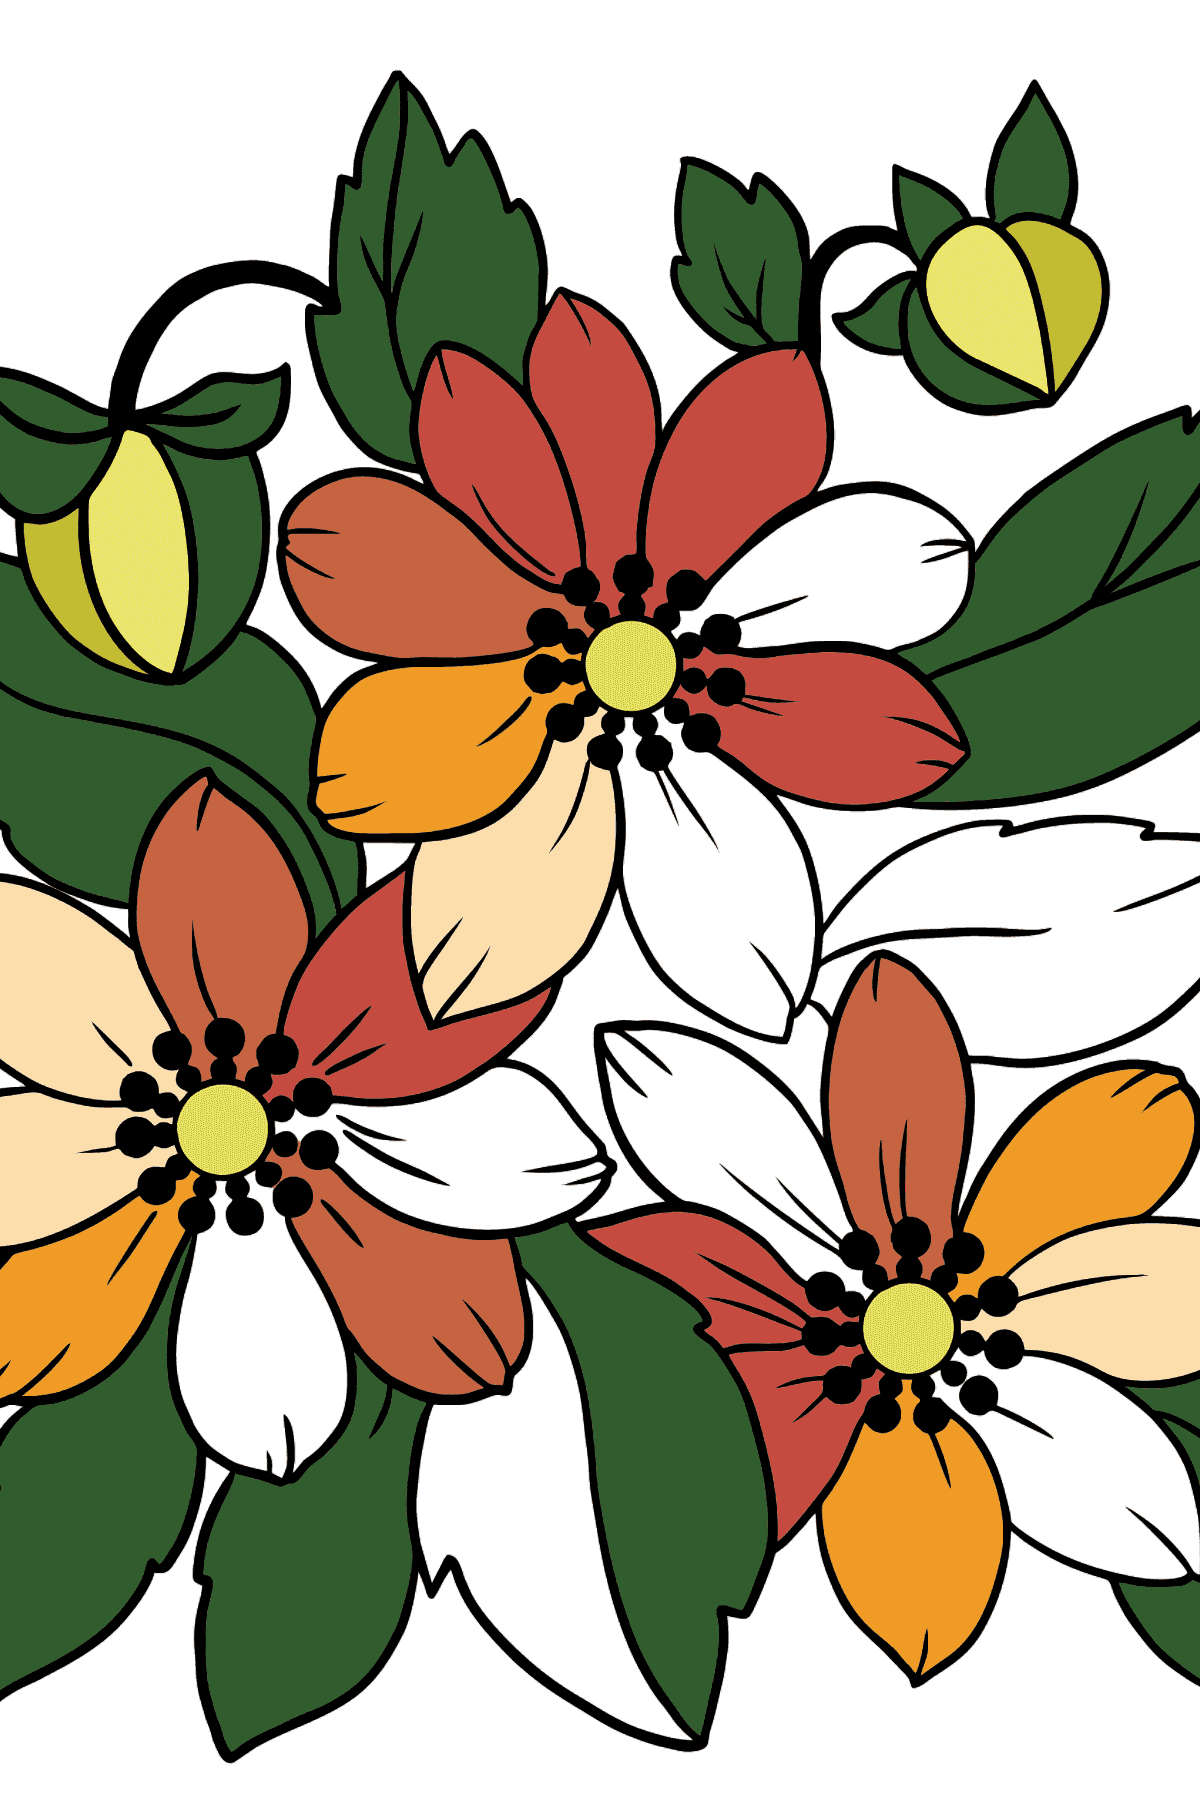 Flower Coloring Page - An Orange and Yellow Anemone - Coloring Pages for Kids